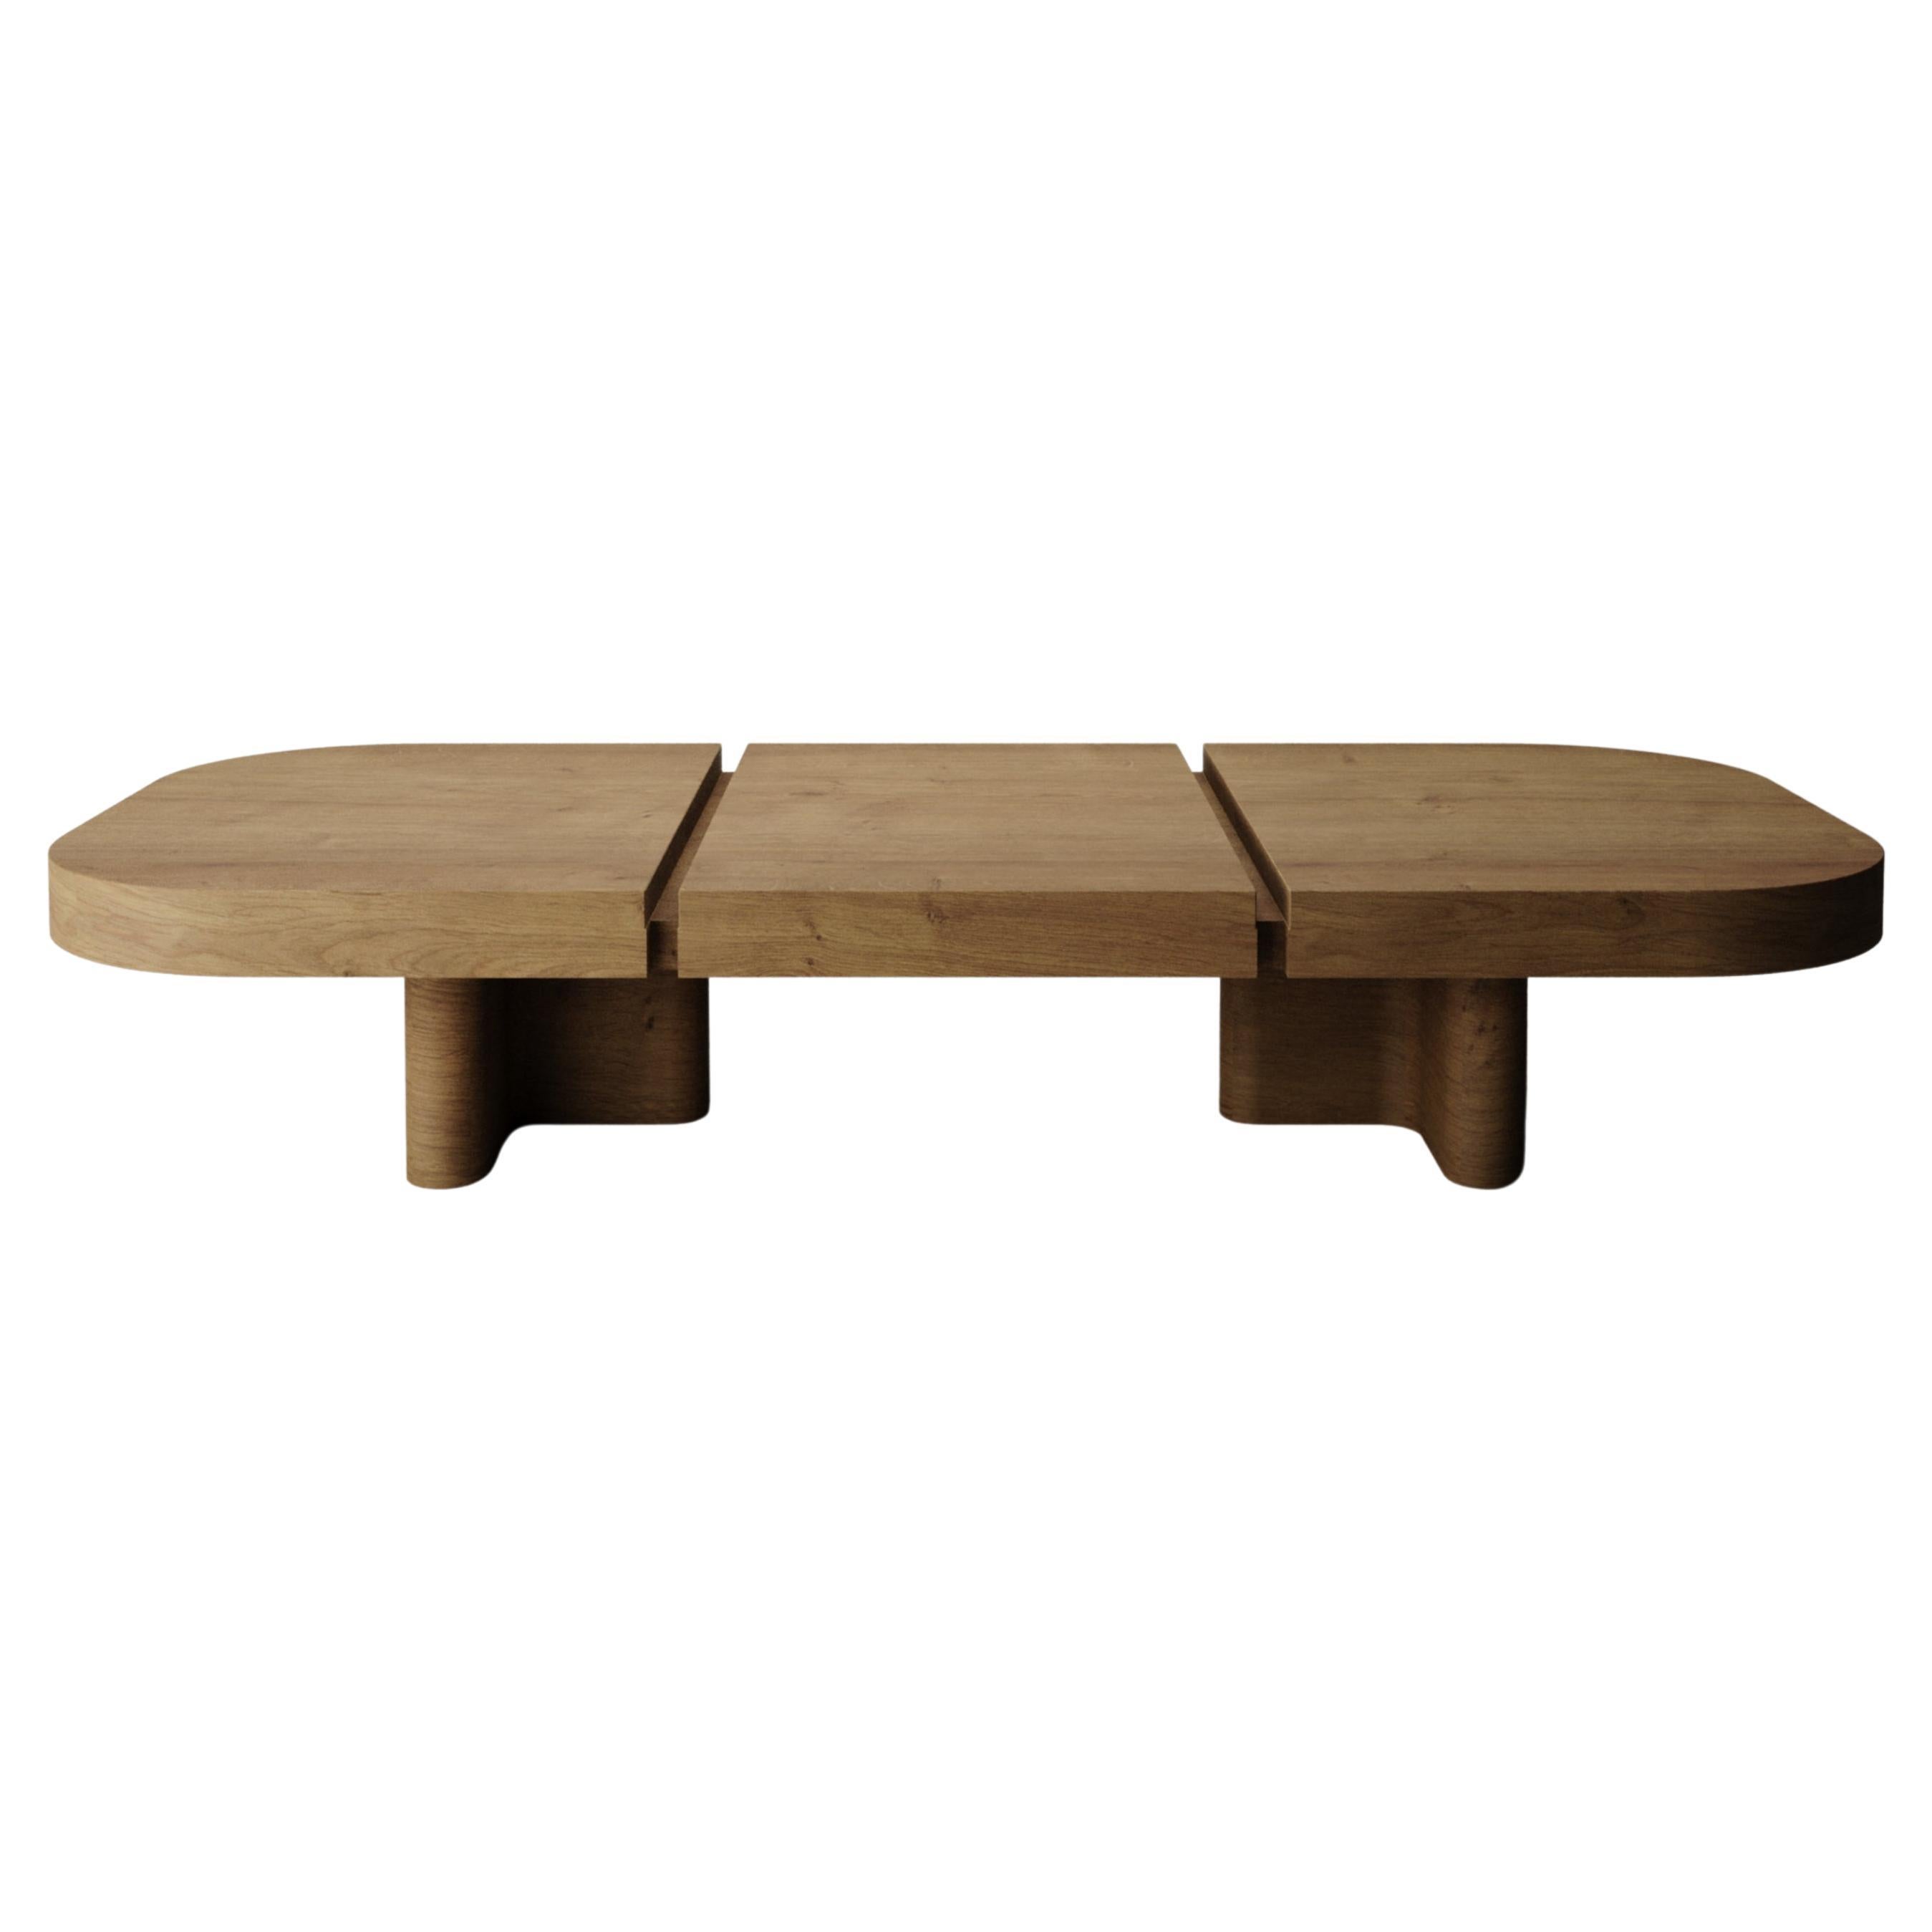 Collector -Designed by Studio Rig Meco Center Table Smoke Oak For Sale